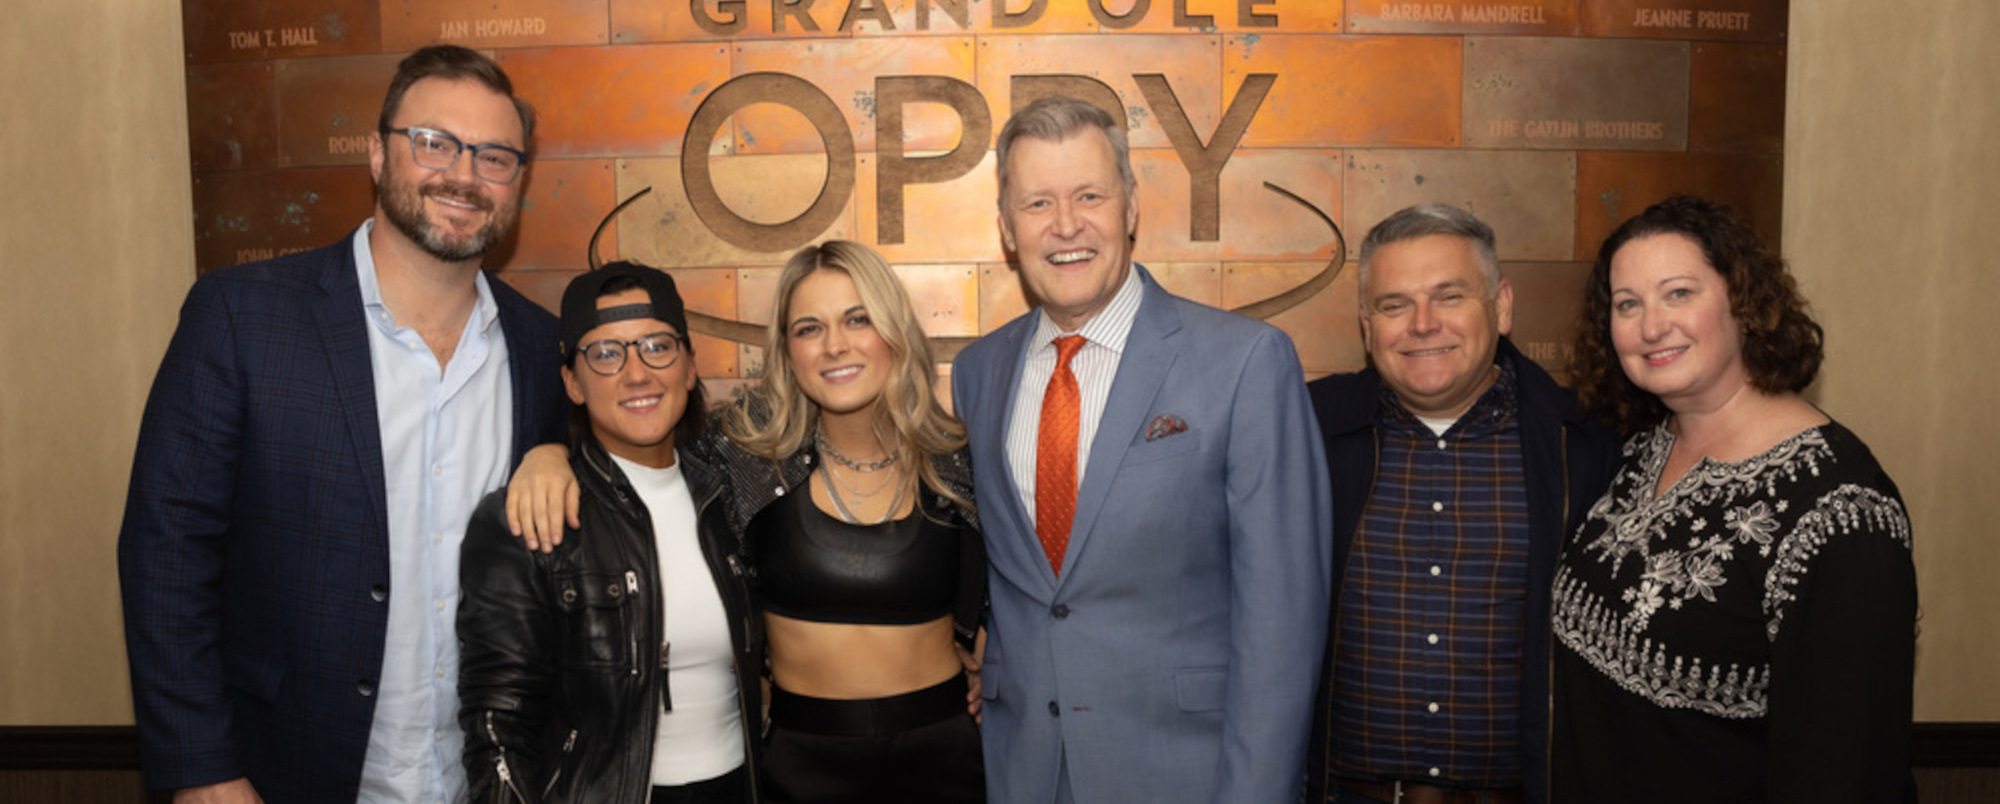 Alana Springsteen Celebrates 22nd Birthday with Grand Ole Opry Debut; Makes Surprise Announcement